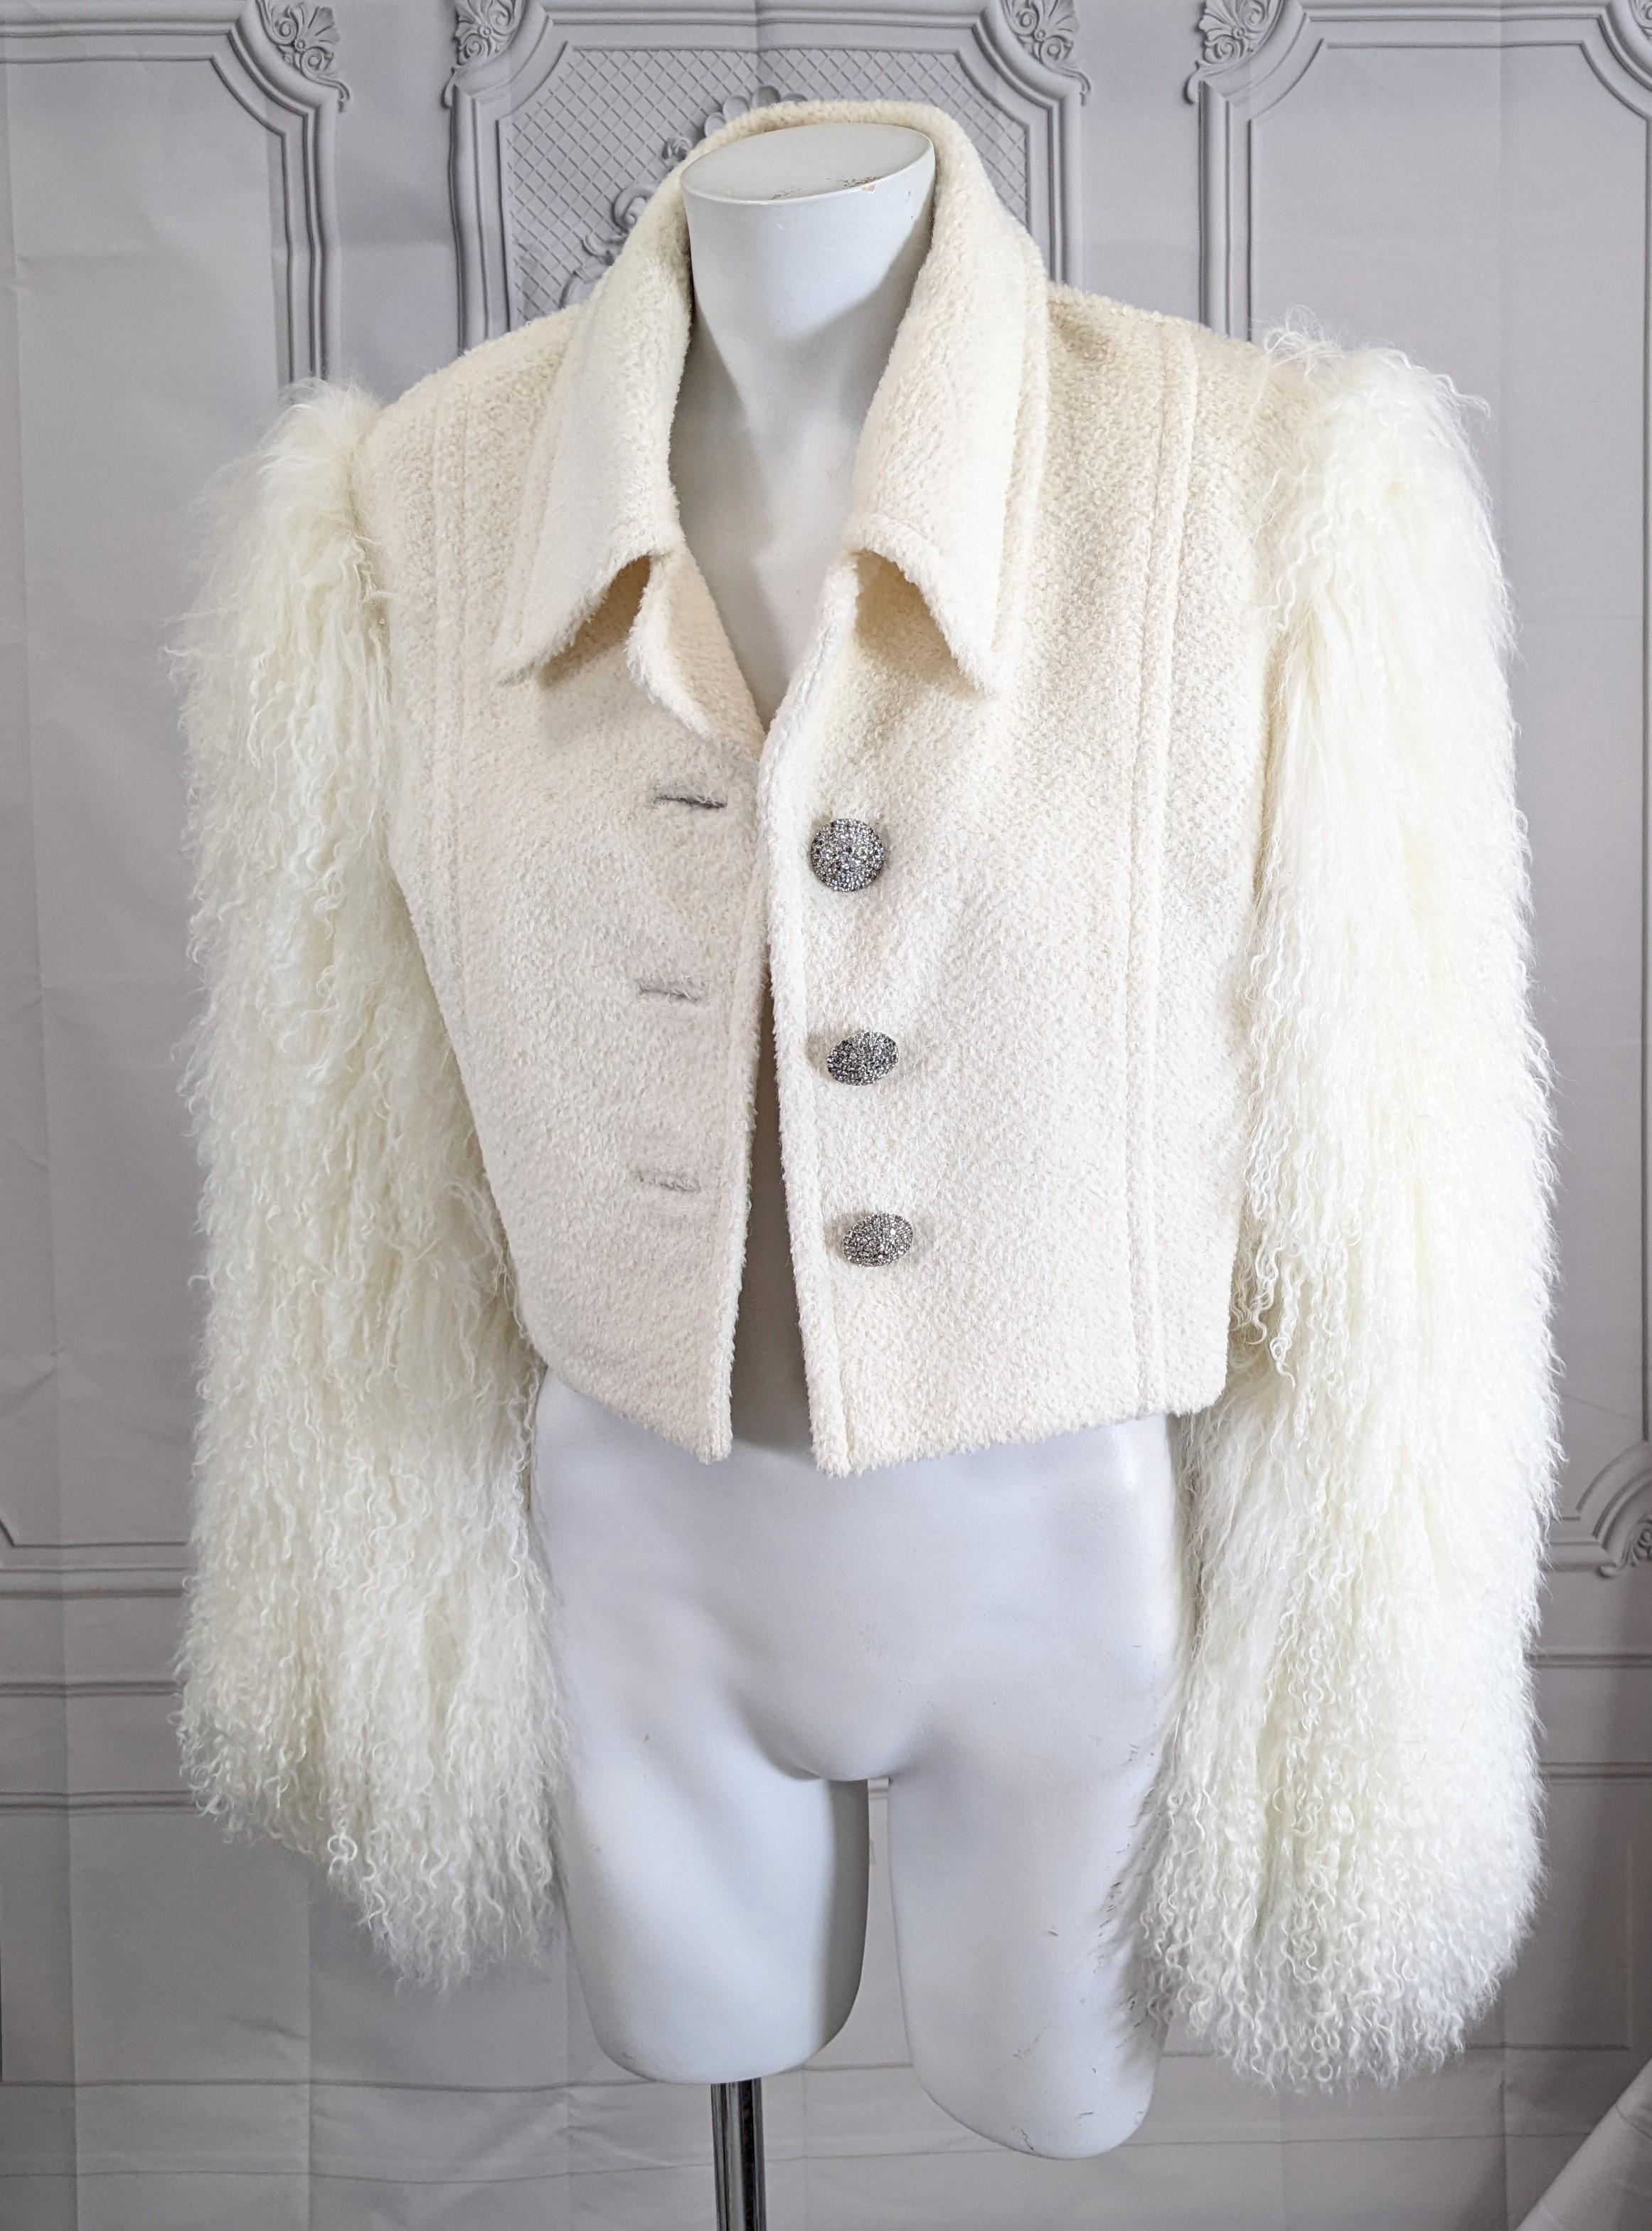 Christian Dior Haute Couture by Gianfranco Ferre In Excellent Condition For Sale In New York, NY